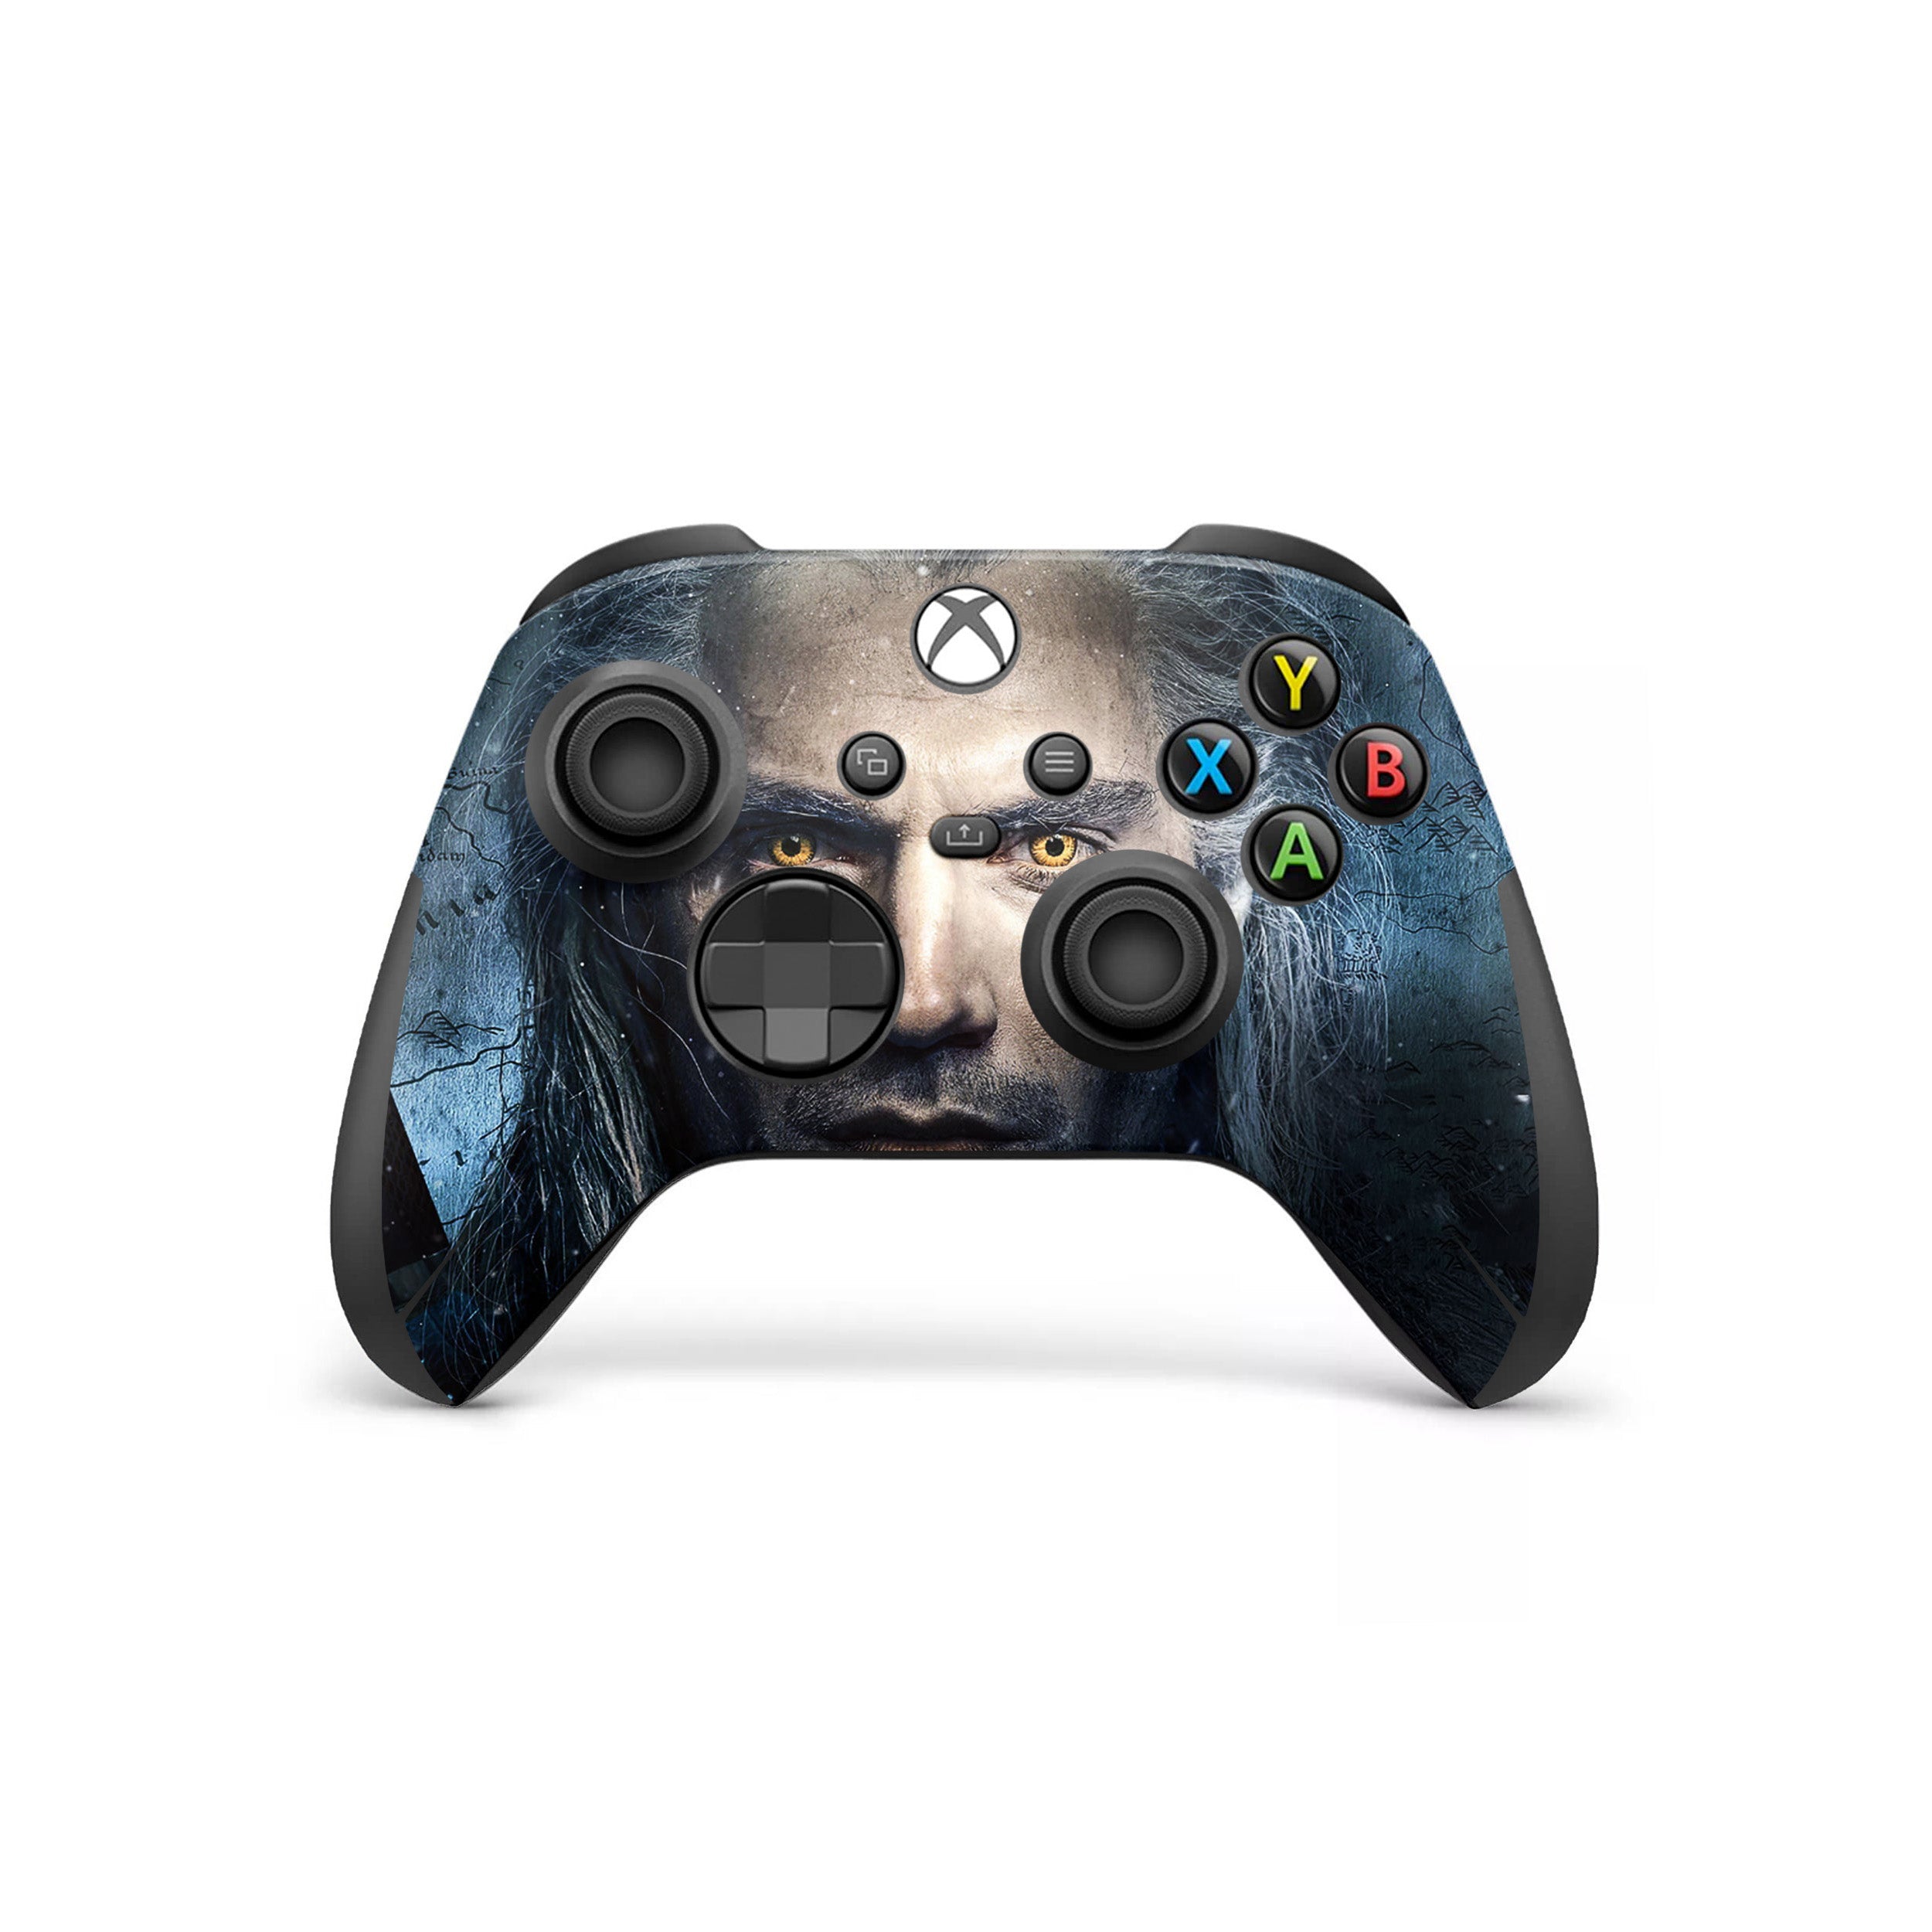 A video game skin featuring a The Witcher design for the Xbox Wireless Controller.